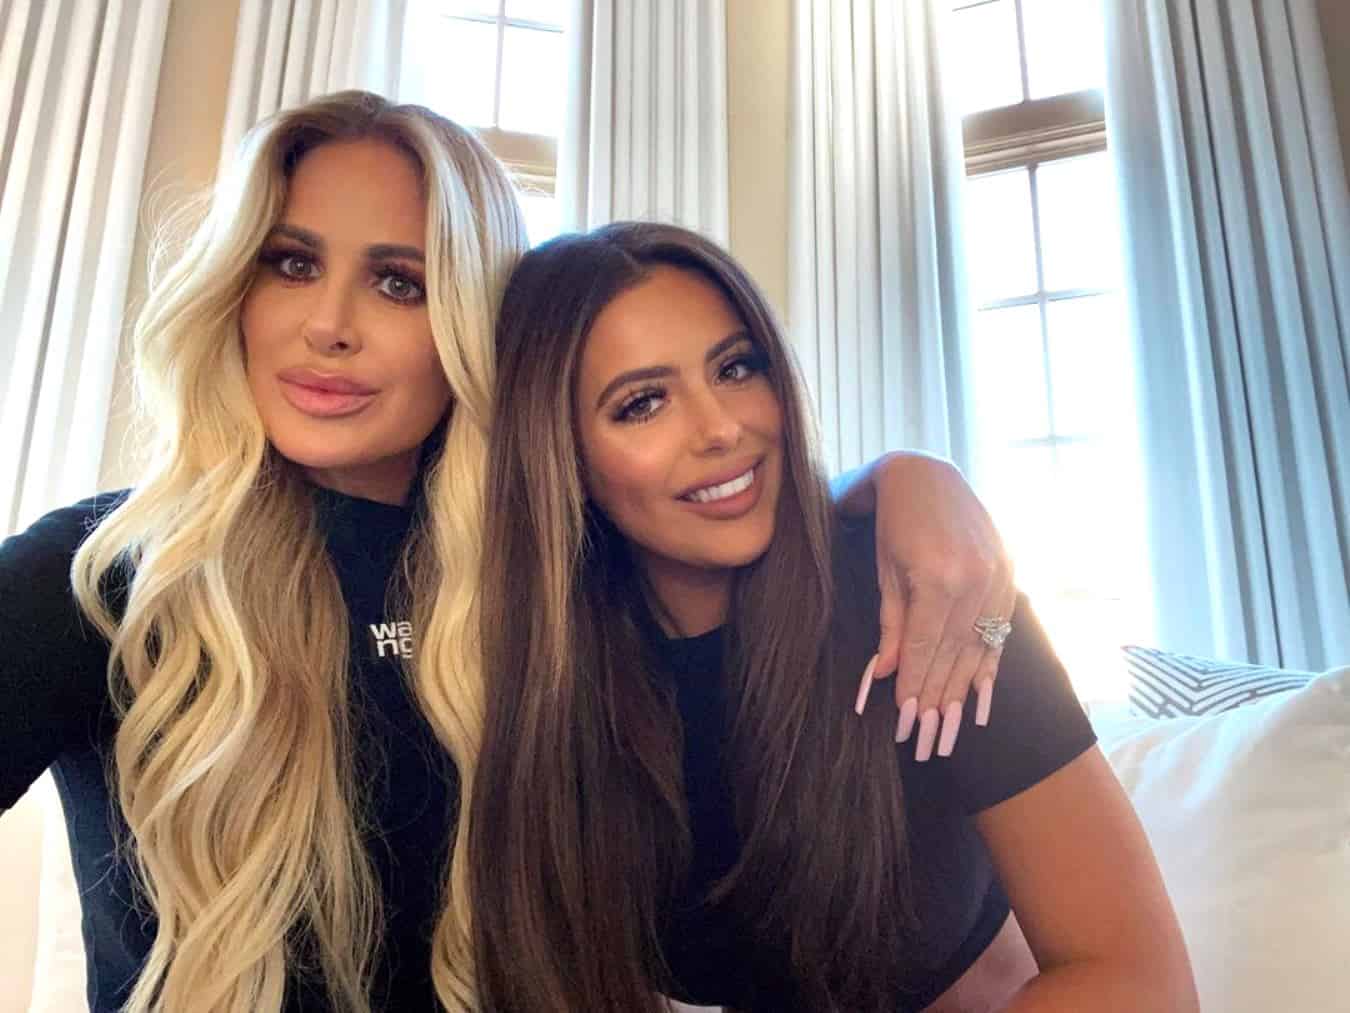 PHOTOS: Kim Zolciak Posts Sexy Snake Bikini Photos of Daughter Brielle Biermann as Don’t Be Tardy Star Brielle Tests Positive For COVID-19